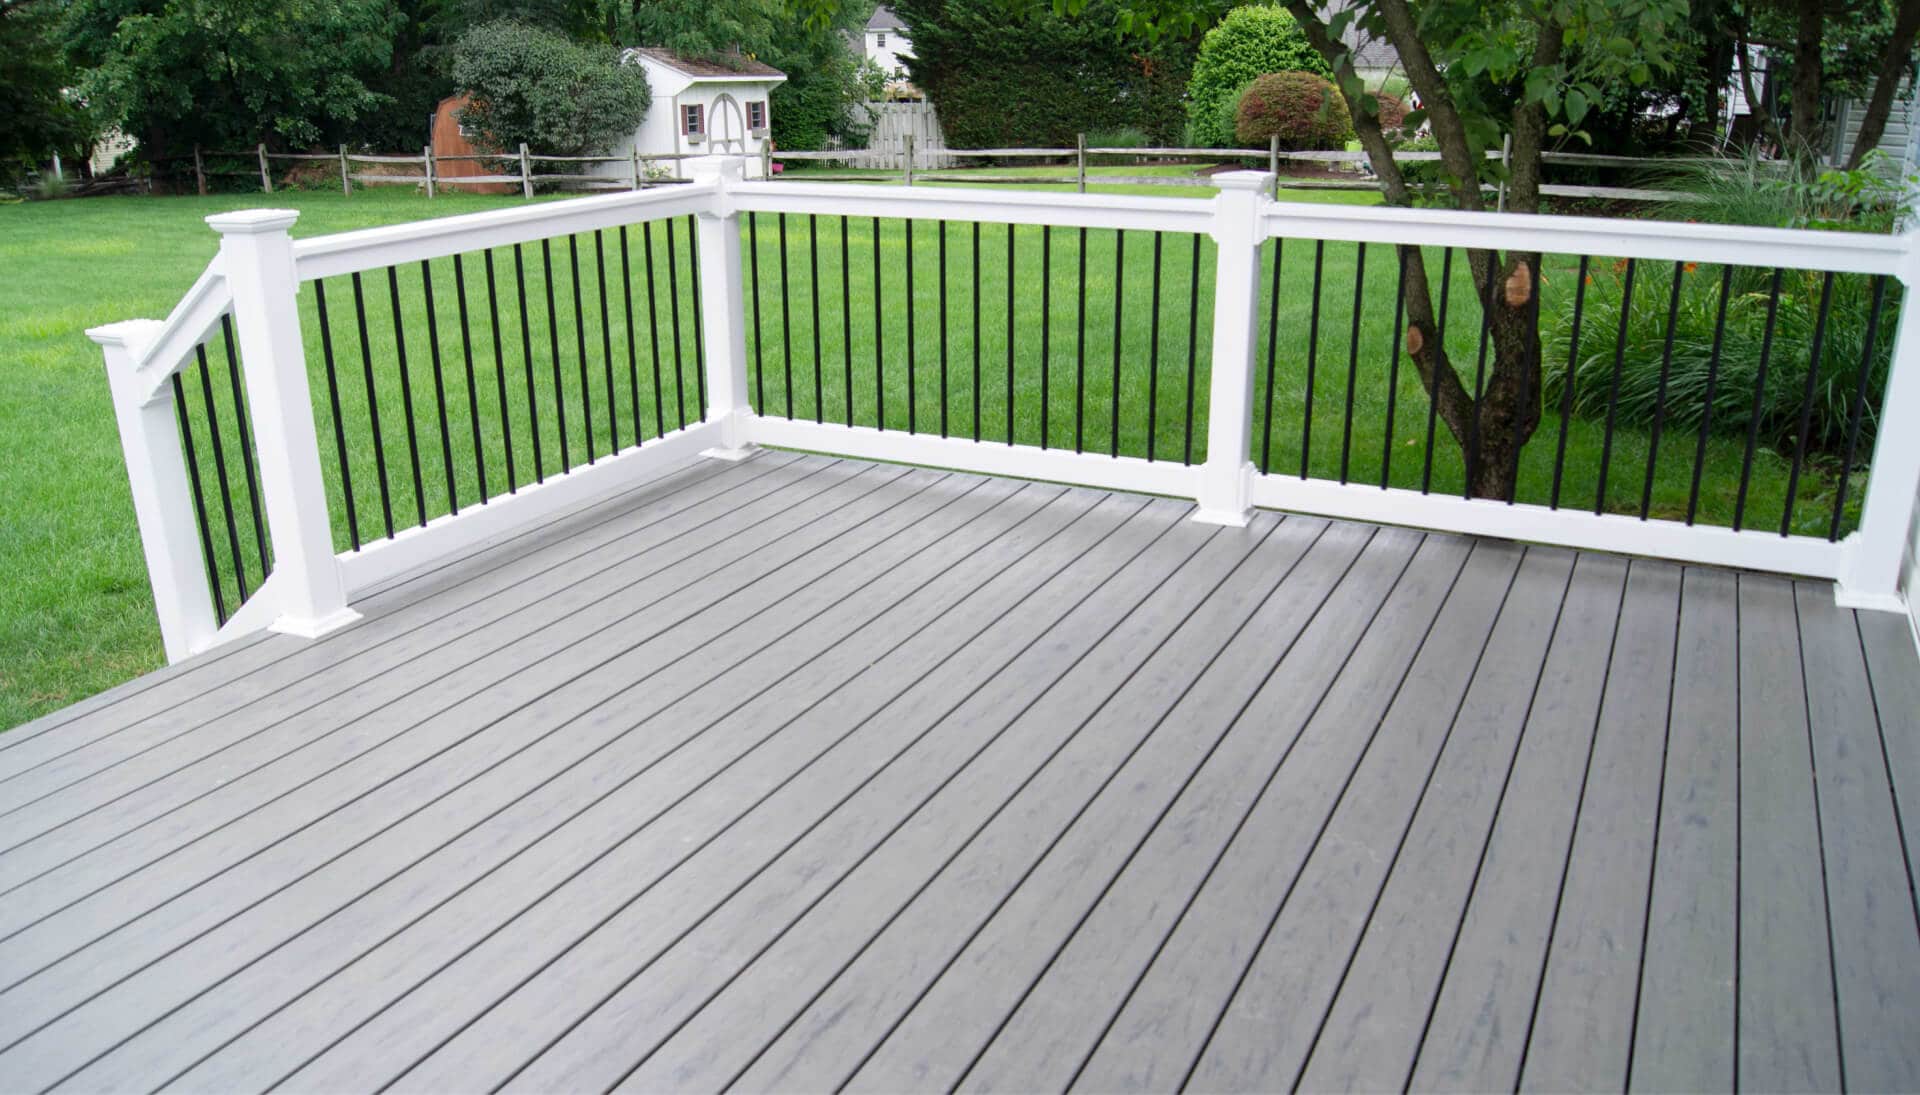 Specialists in deck railing and covers Warwick, Rhode Island